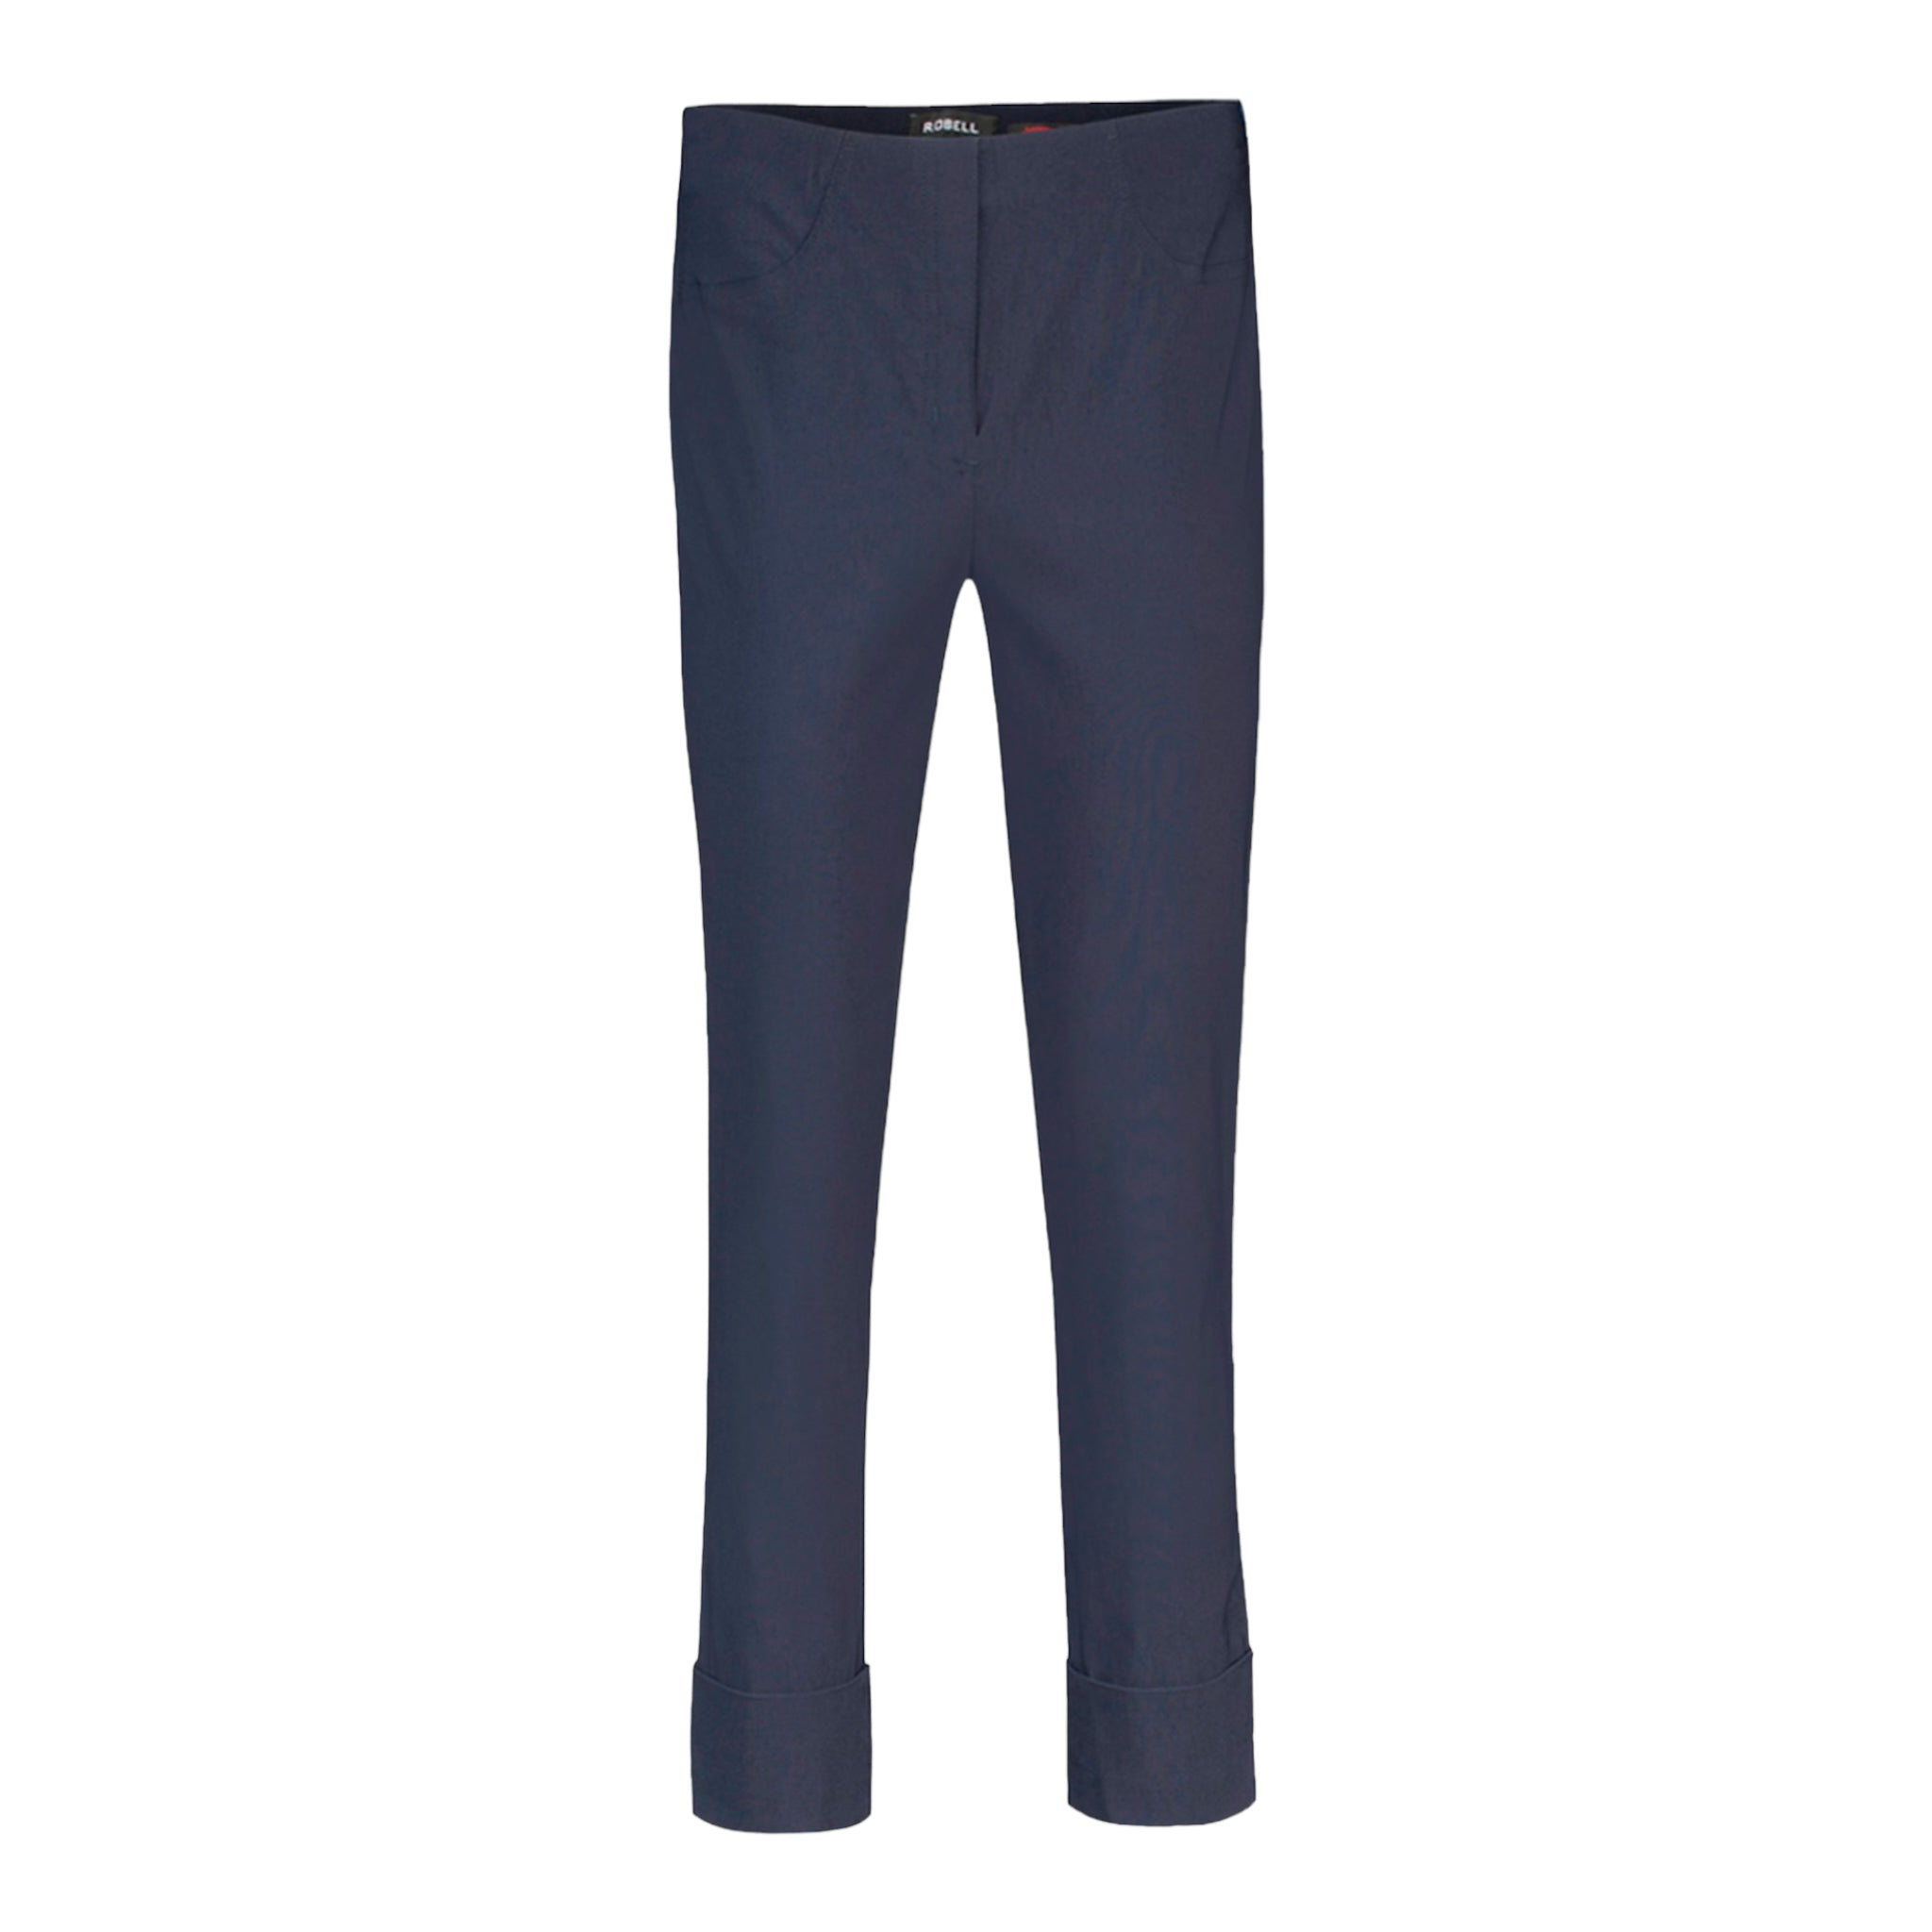 Robell_bella-09-Trousers-with-Cuff-Navy-Product-Image-Front-View